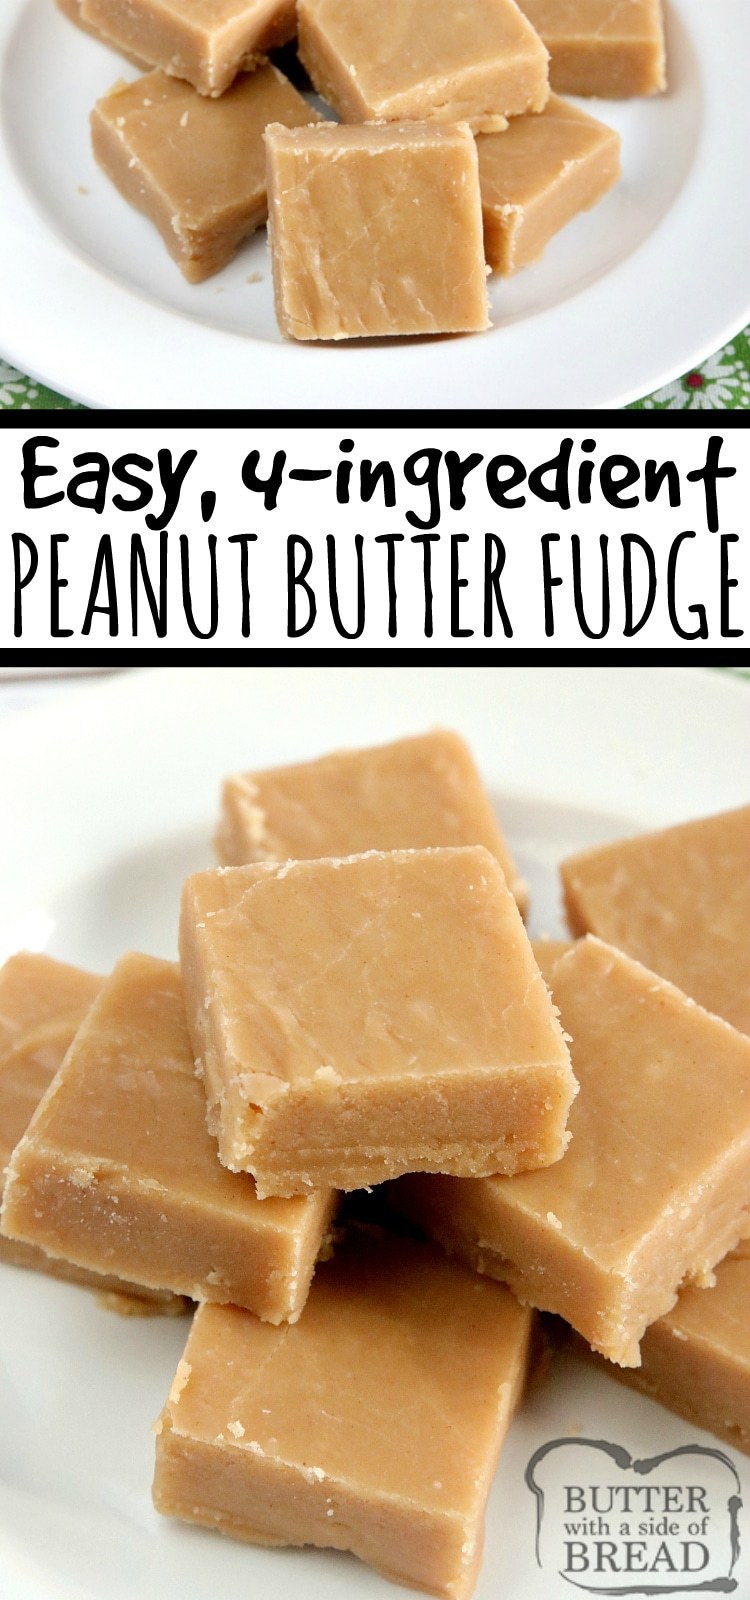 Easy Peanut Butter Fudge is made with only 4 ingredients, no candy thermometer needed! This easy fudge recipe is made with peanut butter, sugar, milk and vanilla extract- that's it! 